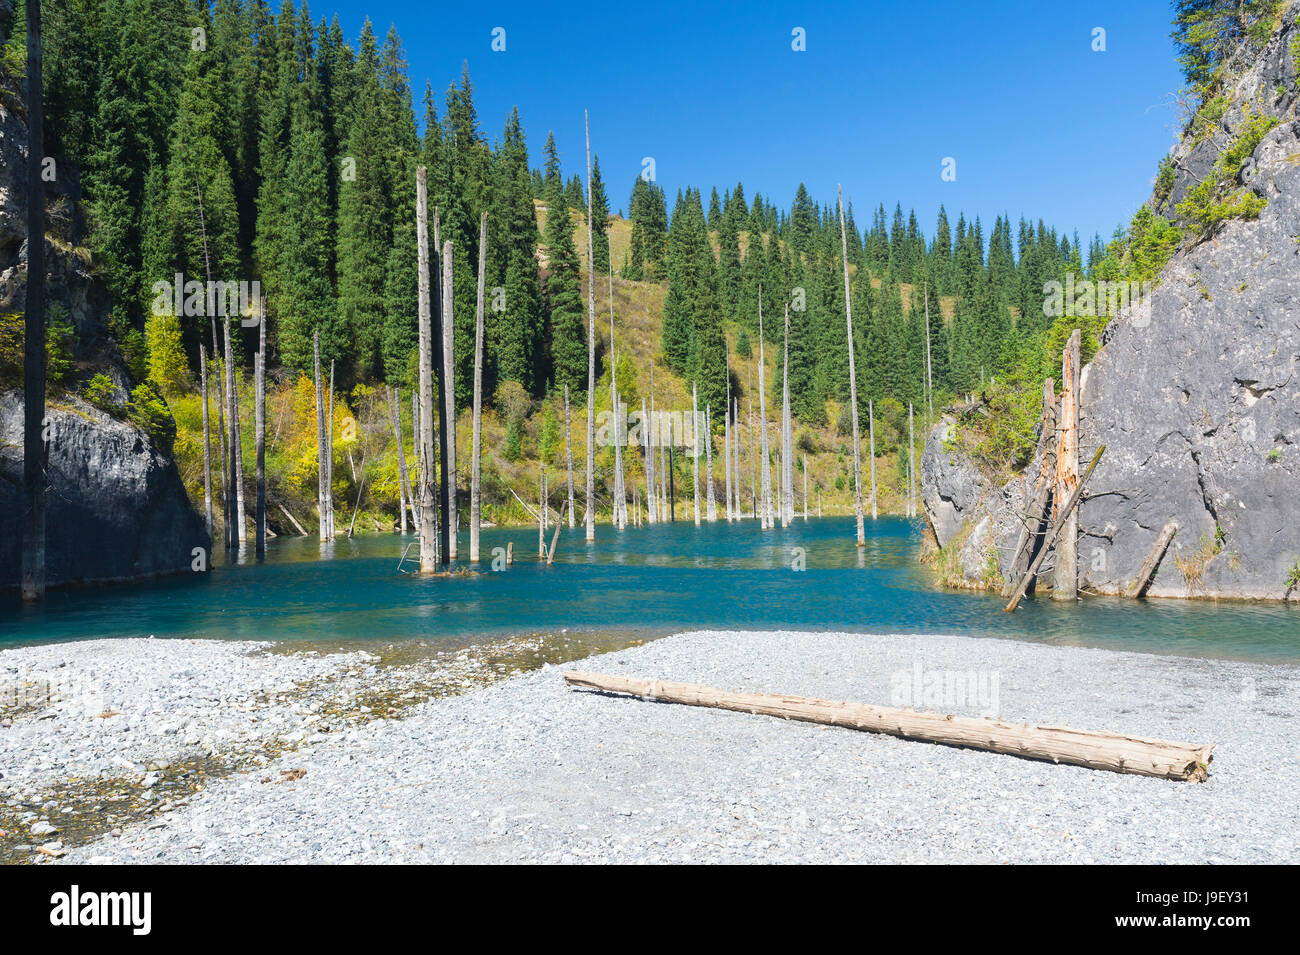 Dried trunks of Picea schrenkiana pointing out of  water in Kaindy lake also known as Birch Tree Lake or Submerged Forest, Tien Shan Mountains, Kazakh Stock Photo